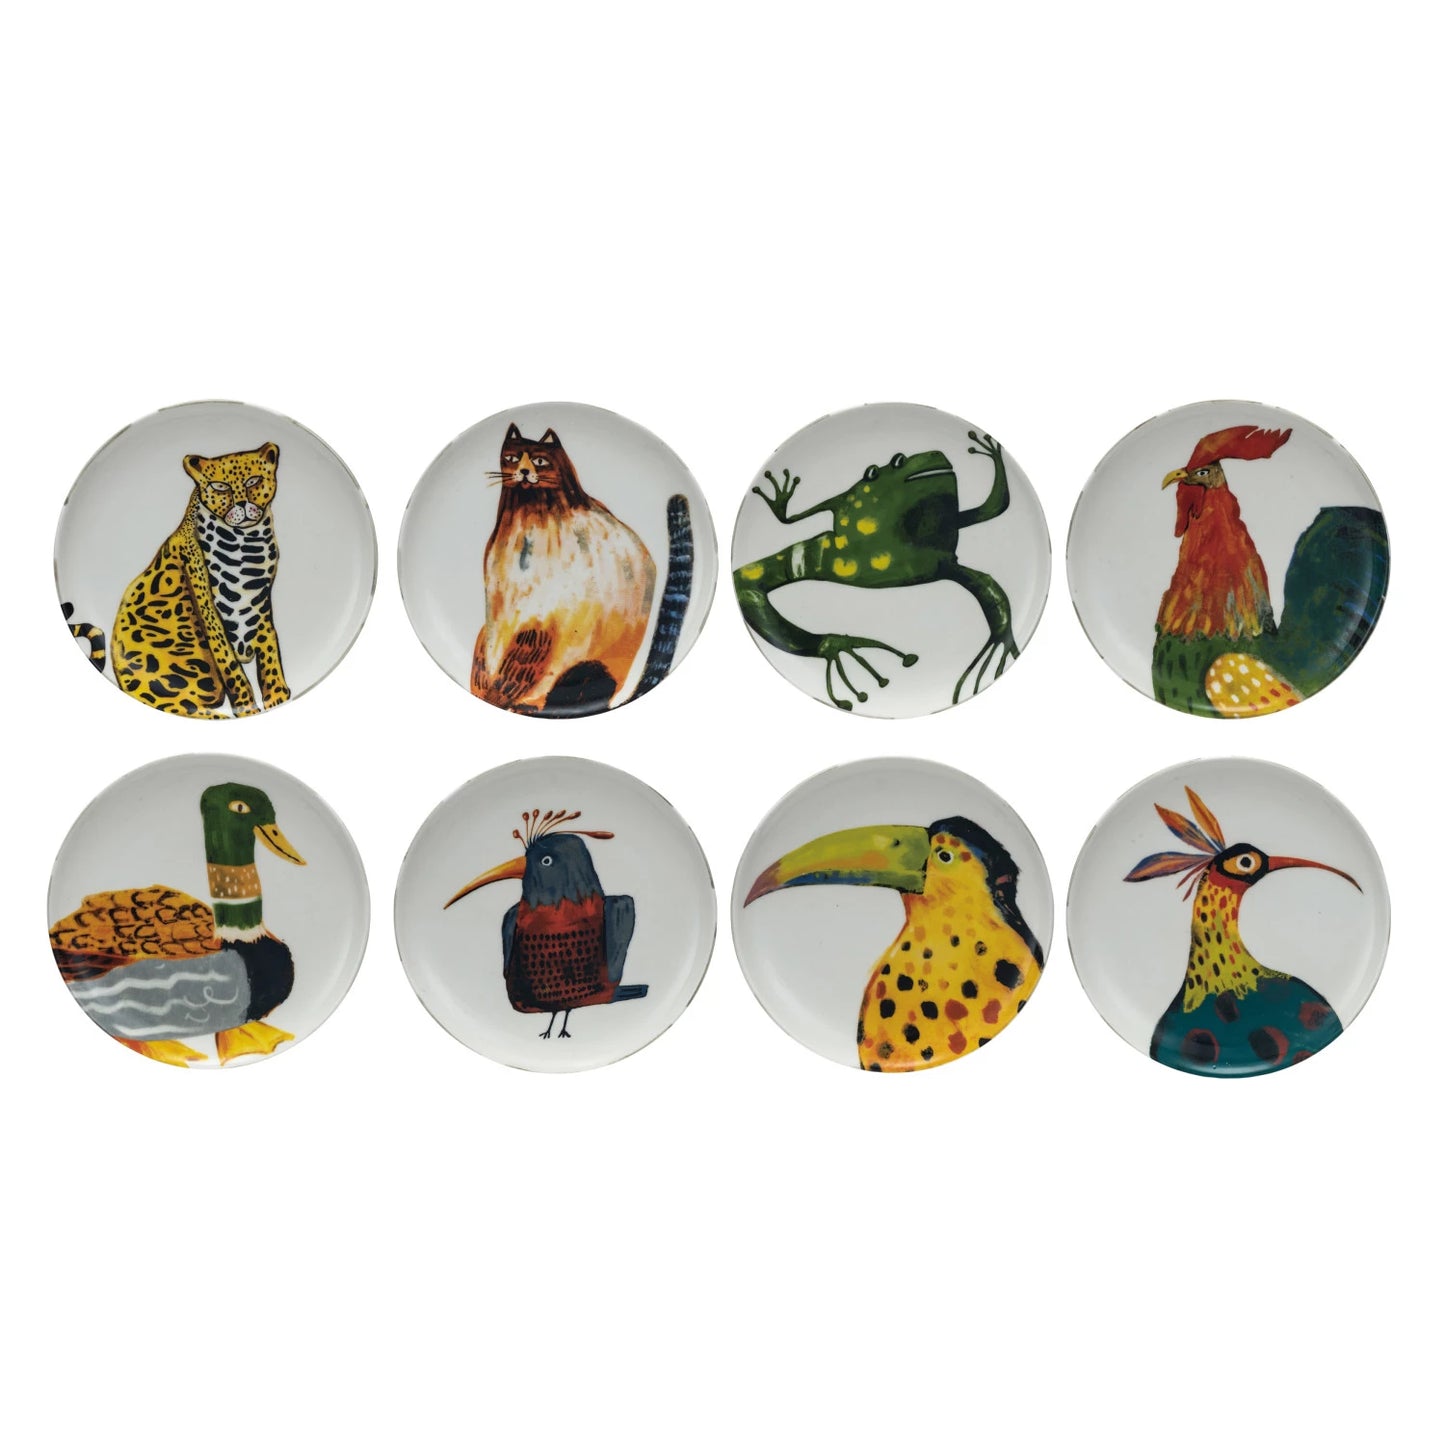 8 assorted plates with animal or bird artwork on them in 2 rows on a white background.